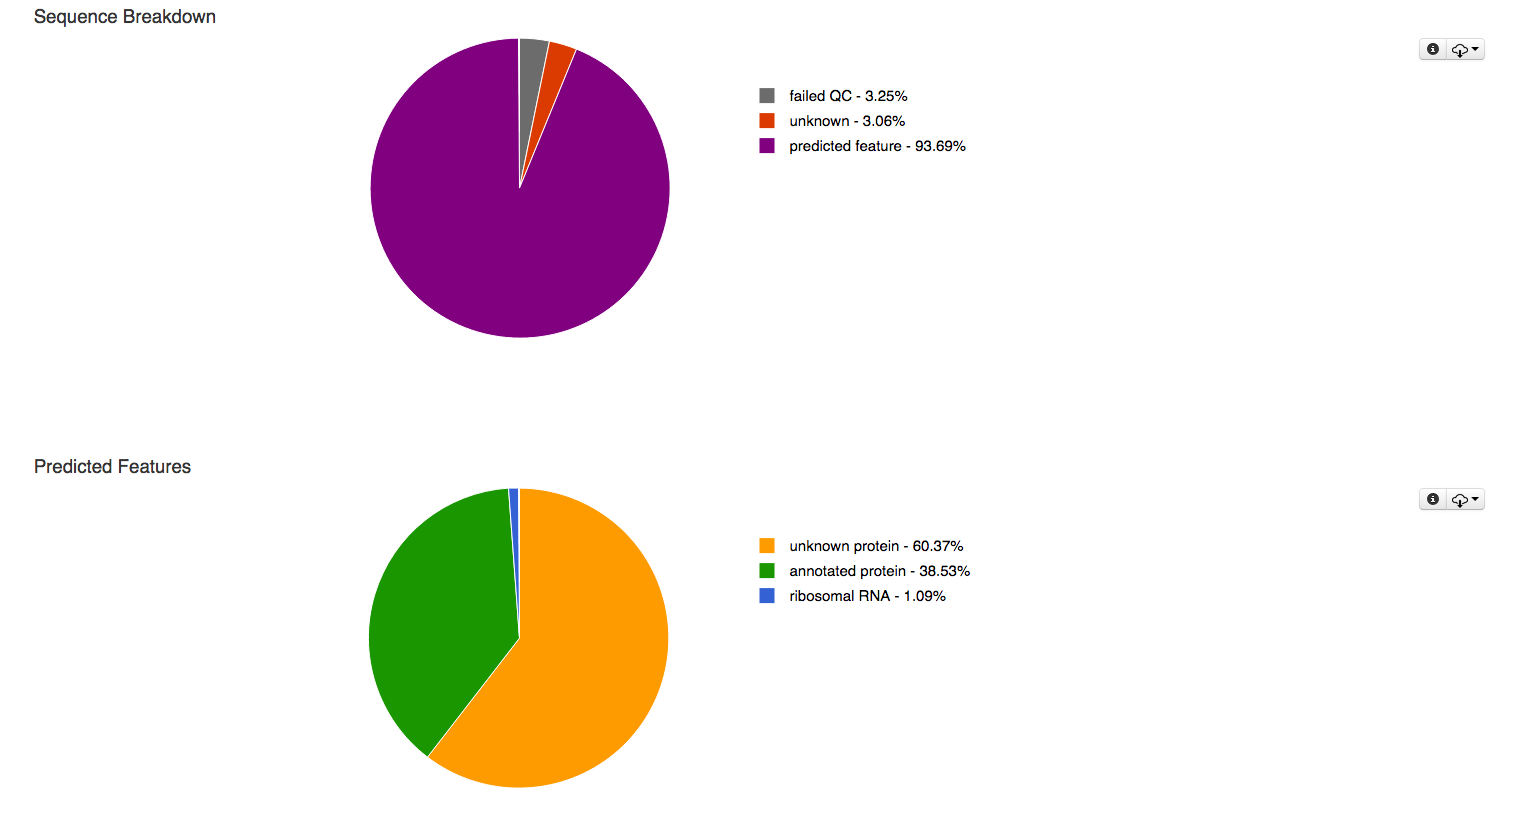 The first pie charts classifies the sequences submitted in this data set according to their QC results, the 2nd breaks down the detected features in to several categories.